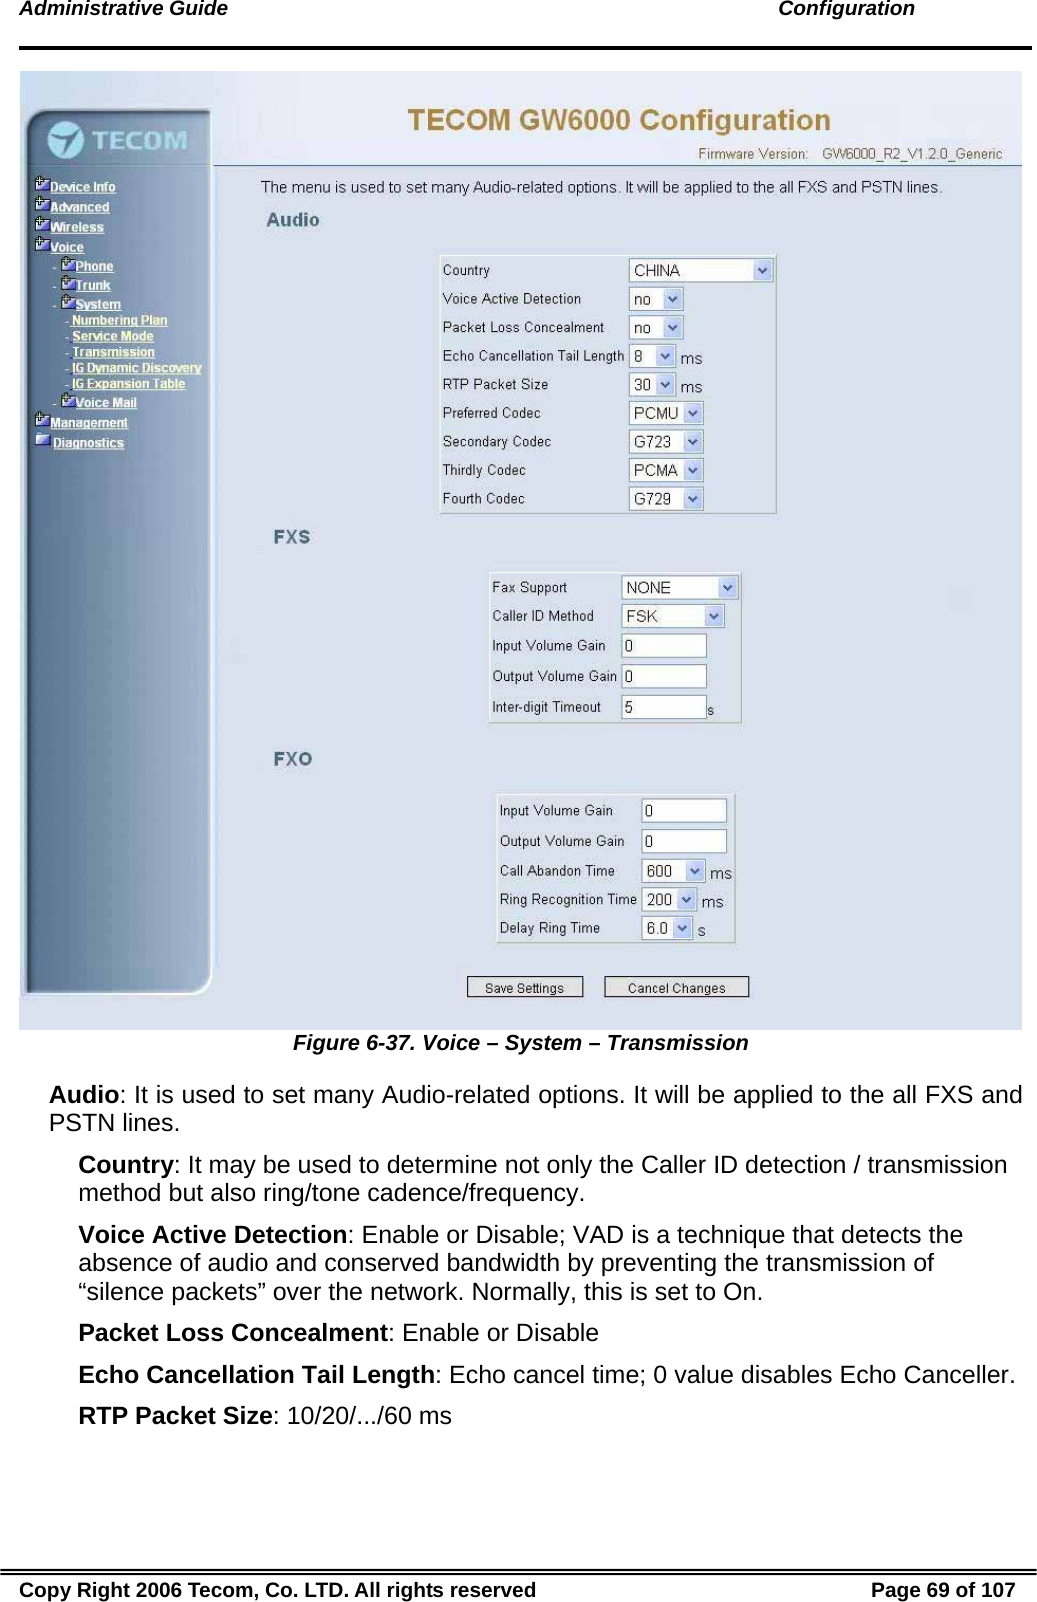 Administrative Guide                                                                                               Configuration  Figure 6-37. Voice – System – Transmission Audio: It is used to set many Audio-related options. It will be applied to the all FXS and PSTN lines. Country: It may be used to determine not only the Caller ID detection / transmission method but also ring/tone cadence/frequency. Voice Active Detection: Enable or Disable; VAD is a technique that detects the absence of audio and conserved bandwidth by preventing the transmission of “silence packets” over the network. Normally, this is set to On. Packet Loss Concealment: Enable or Disable Echo Cancellation Tail Length: Echo cancel time; 0 value disables Echo Canceller. RTP Packet Size: 10/20/.../60 ms Copy Right 2006 Tecom, Co. LTD. All rights reserved  Page 69 of 107 